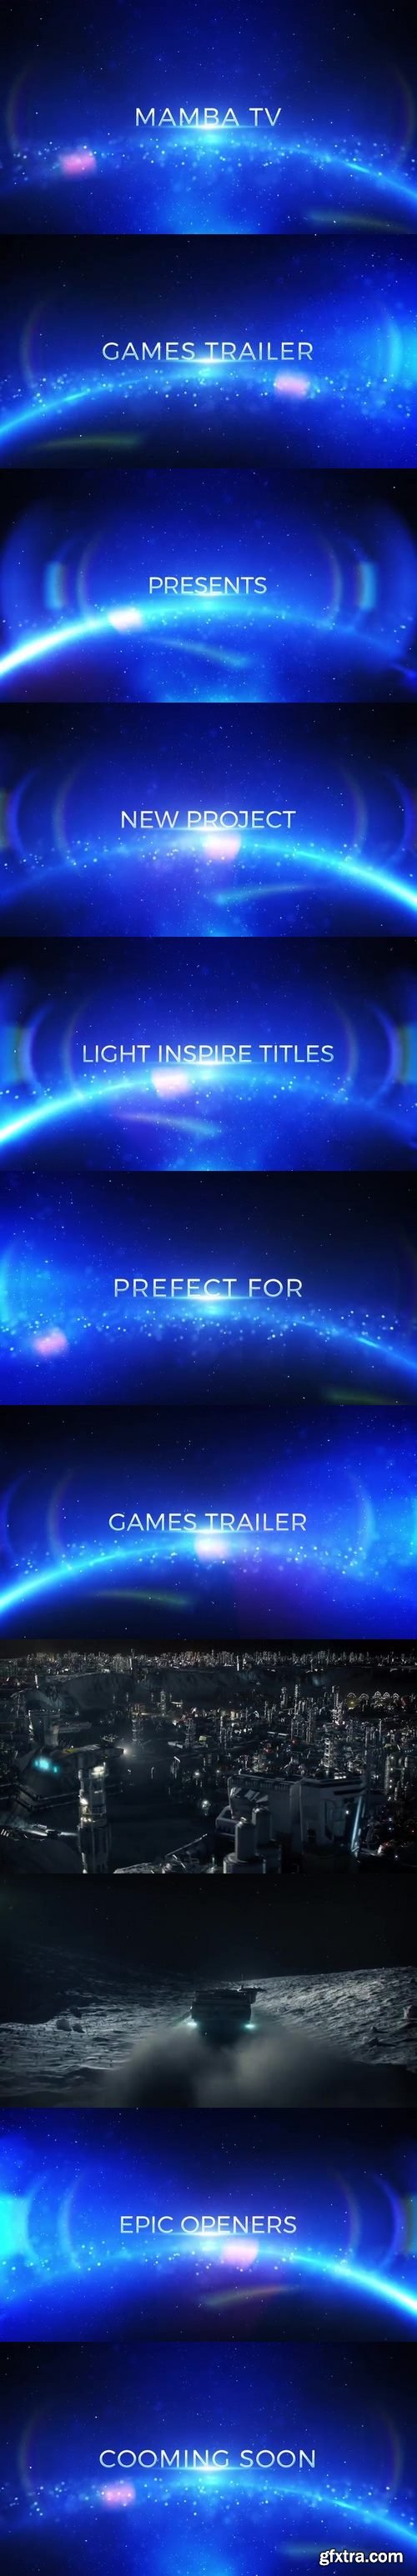 MotionArray - Light Inspire Titles After Effects Templates 58238